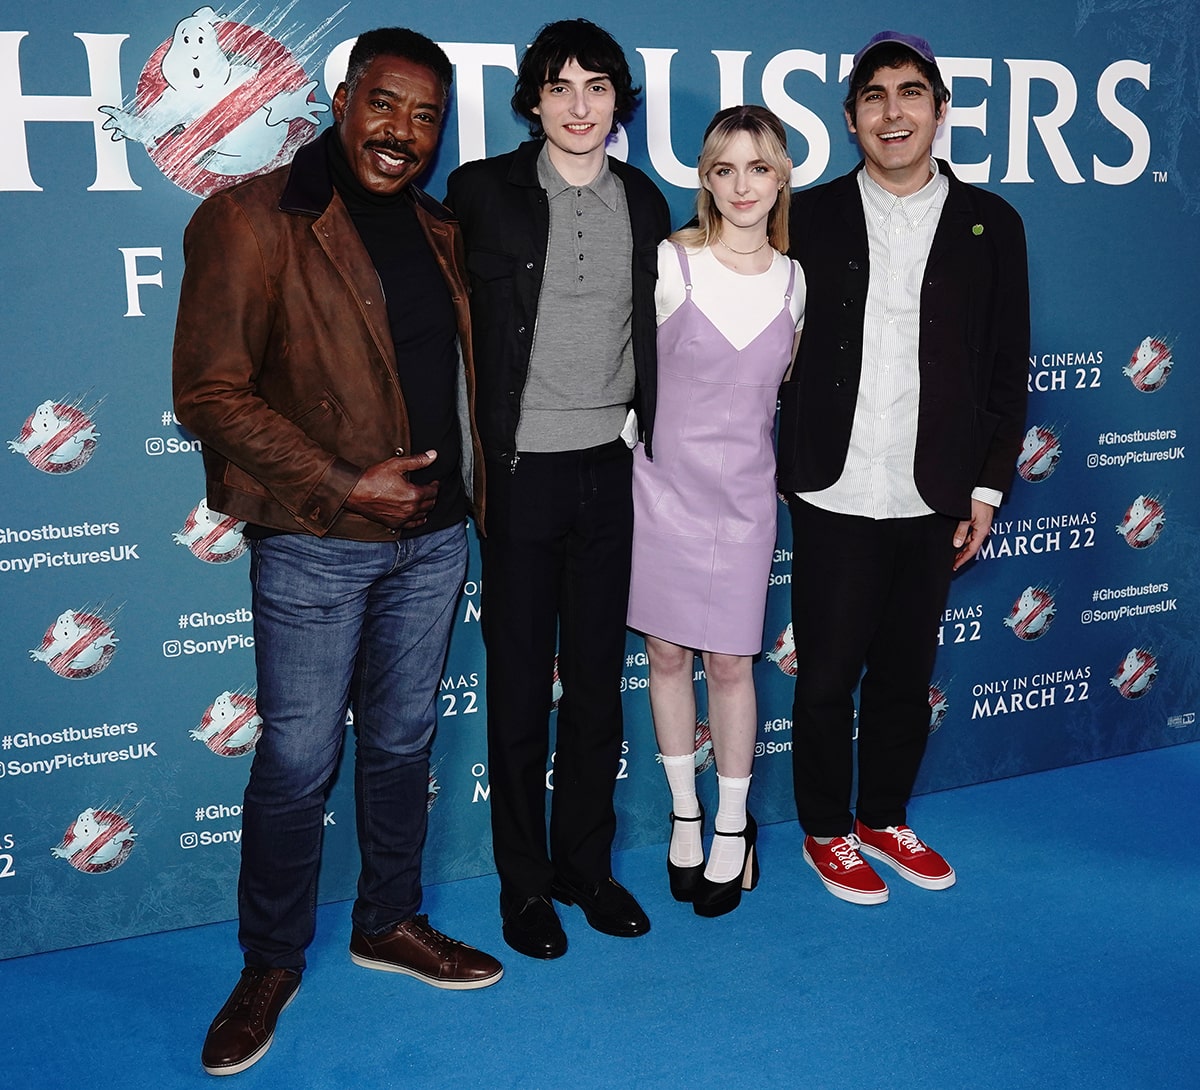 Mckenna Grace stands out in a lilac pinafore dress with a white tee, ruffled socks, and Mary Jane pumps as she poses with co-stars Ernie Hudson and Finn Wolfhard and director Gil Kenan at the UK gala screening of Ghostbusters: Frozen Empire at the Ham Yard Hotel on March 21, 2024